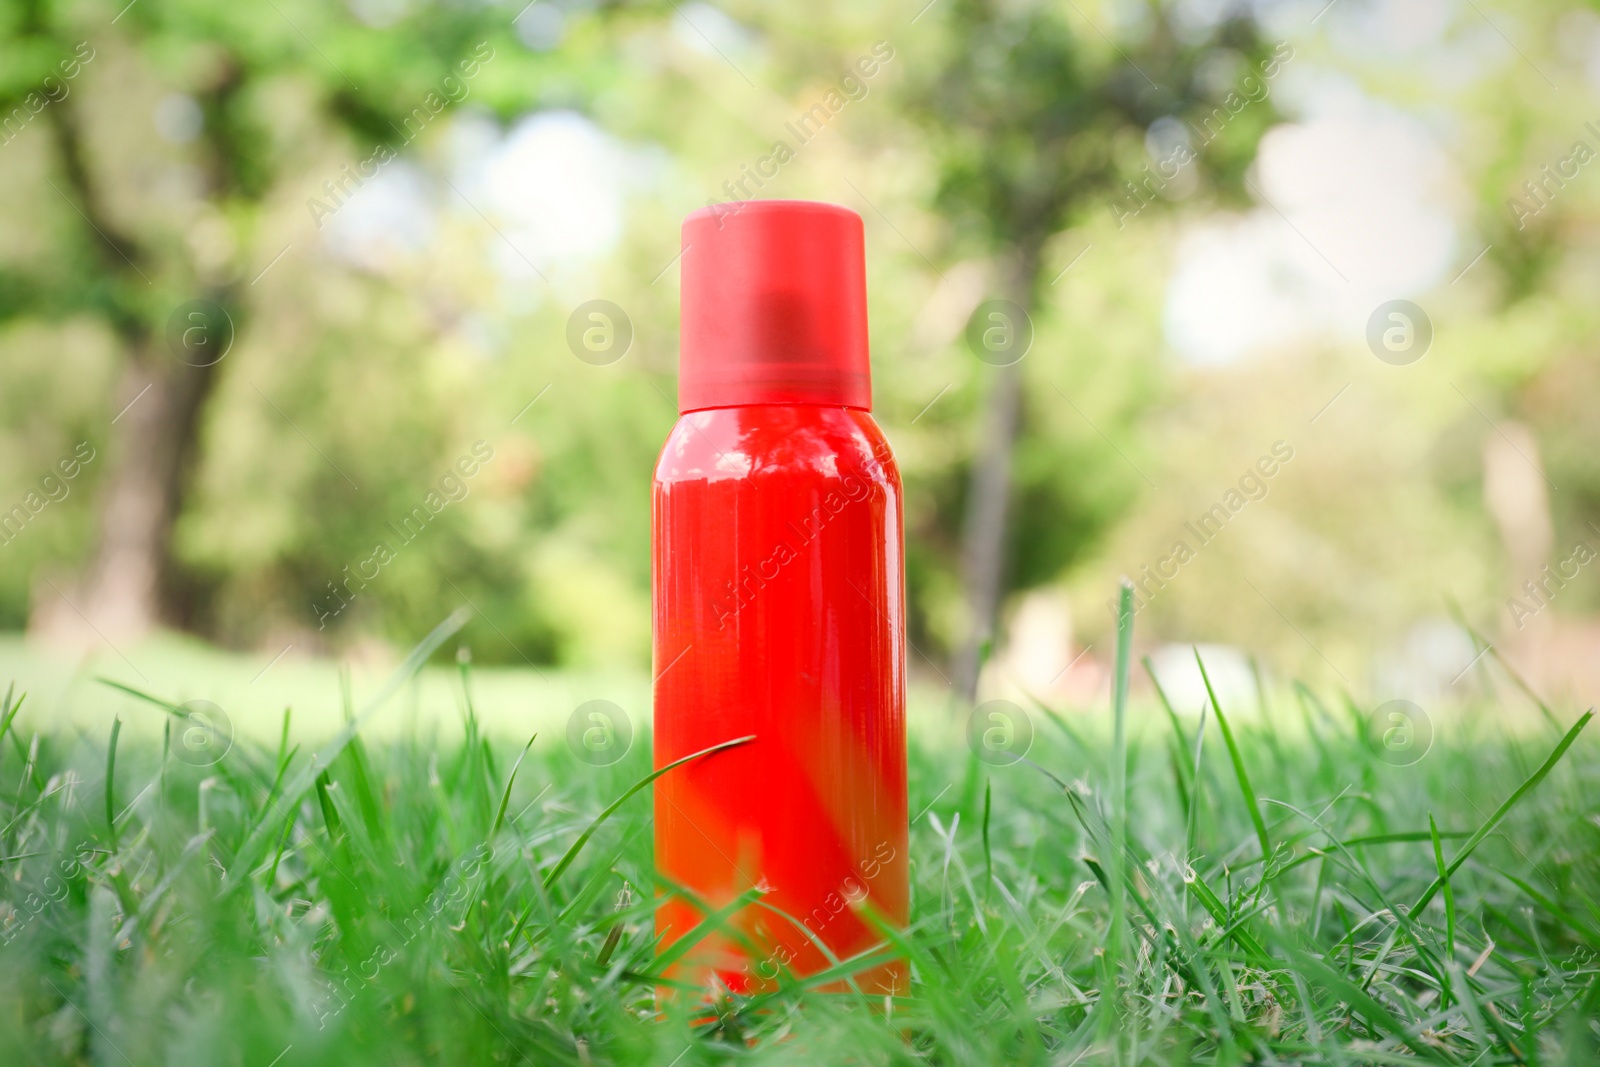 Photo of Bottle of insect repellent spray on grass